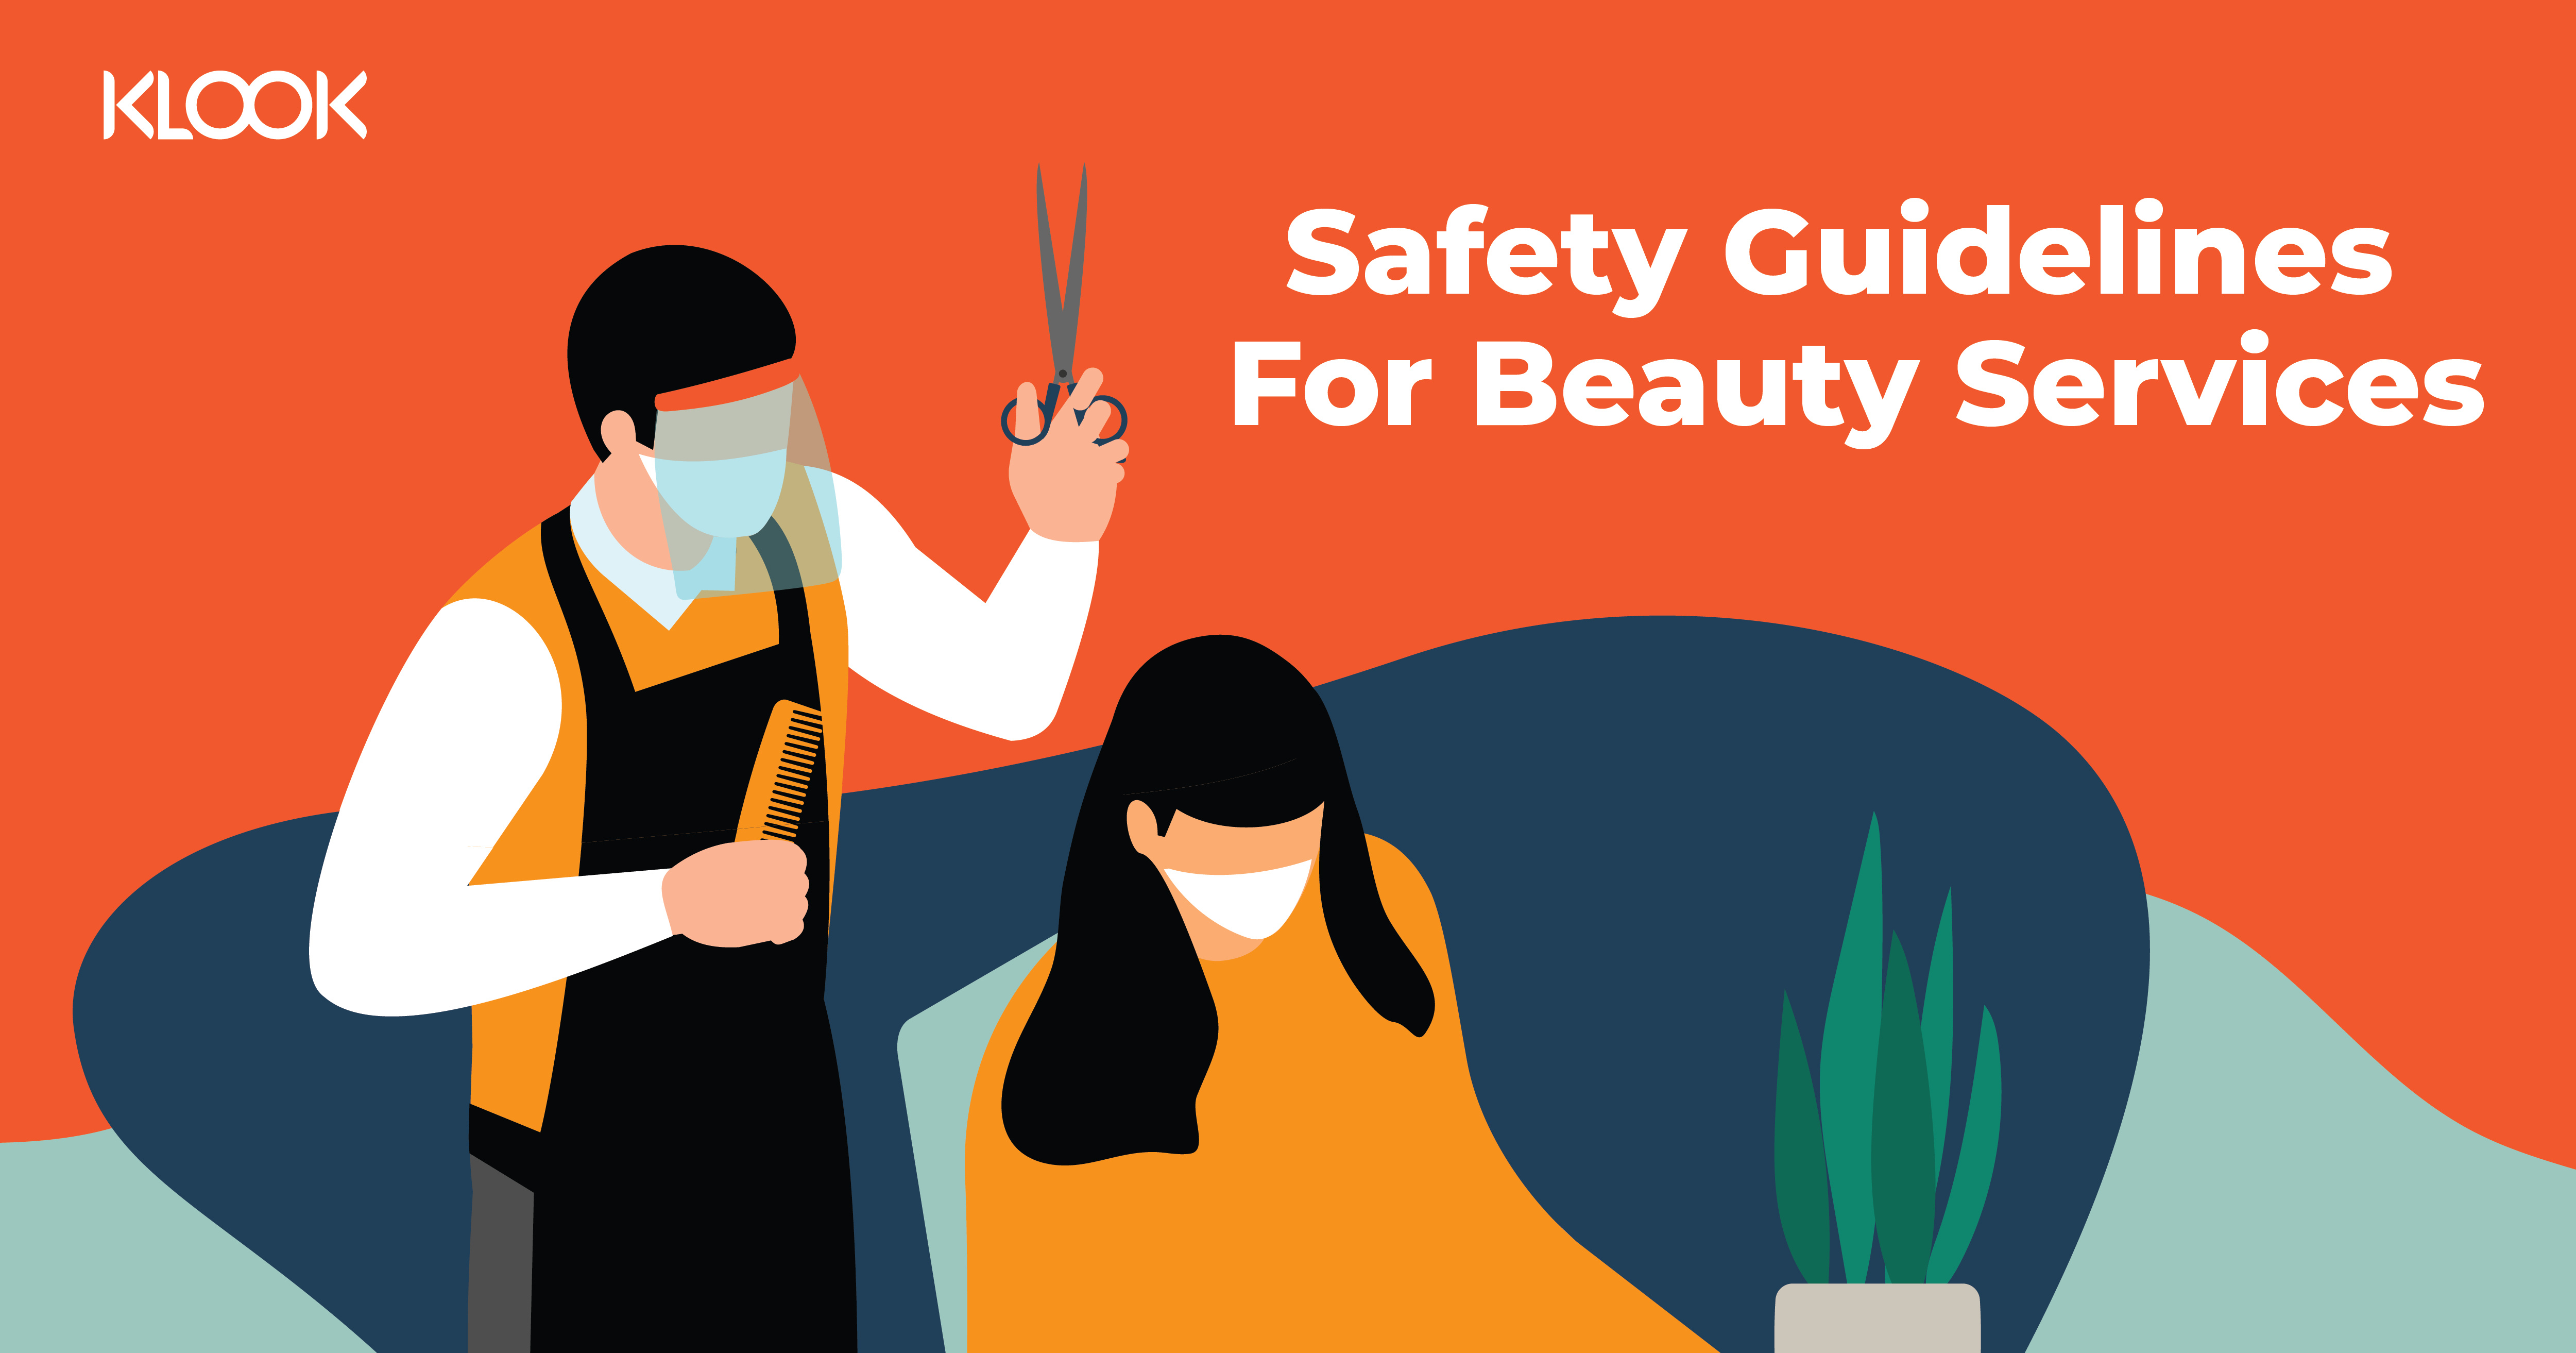 health and safety in the salon assignment